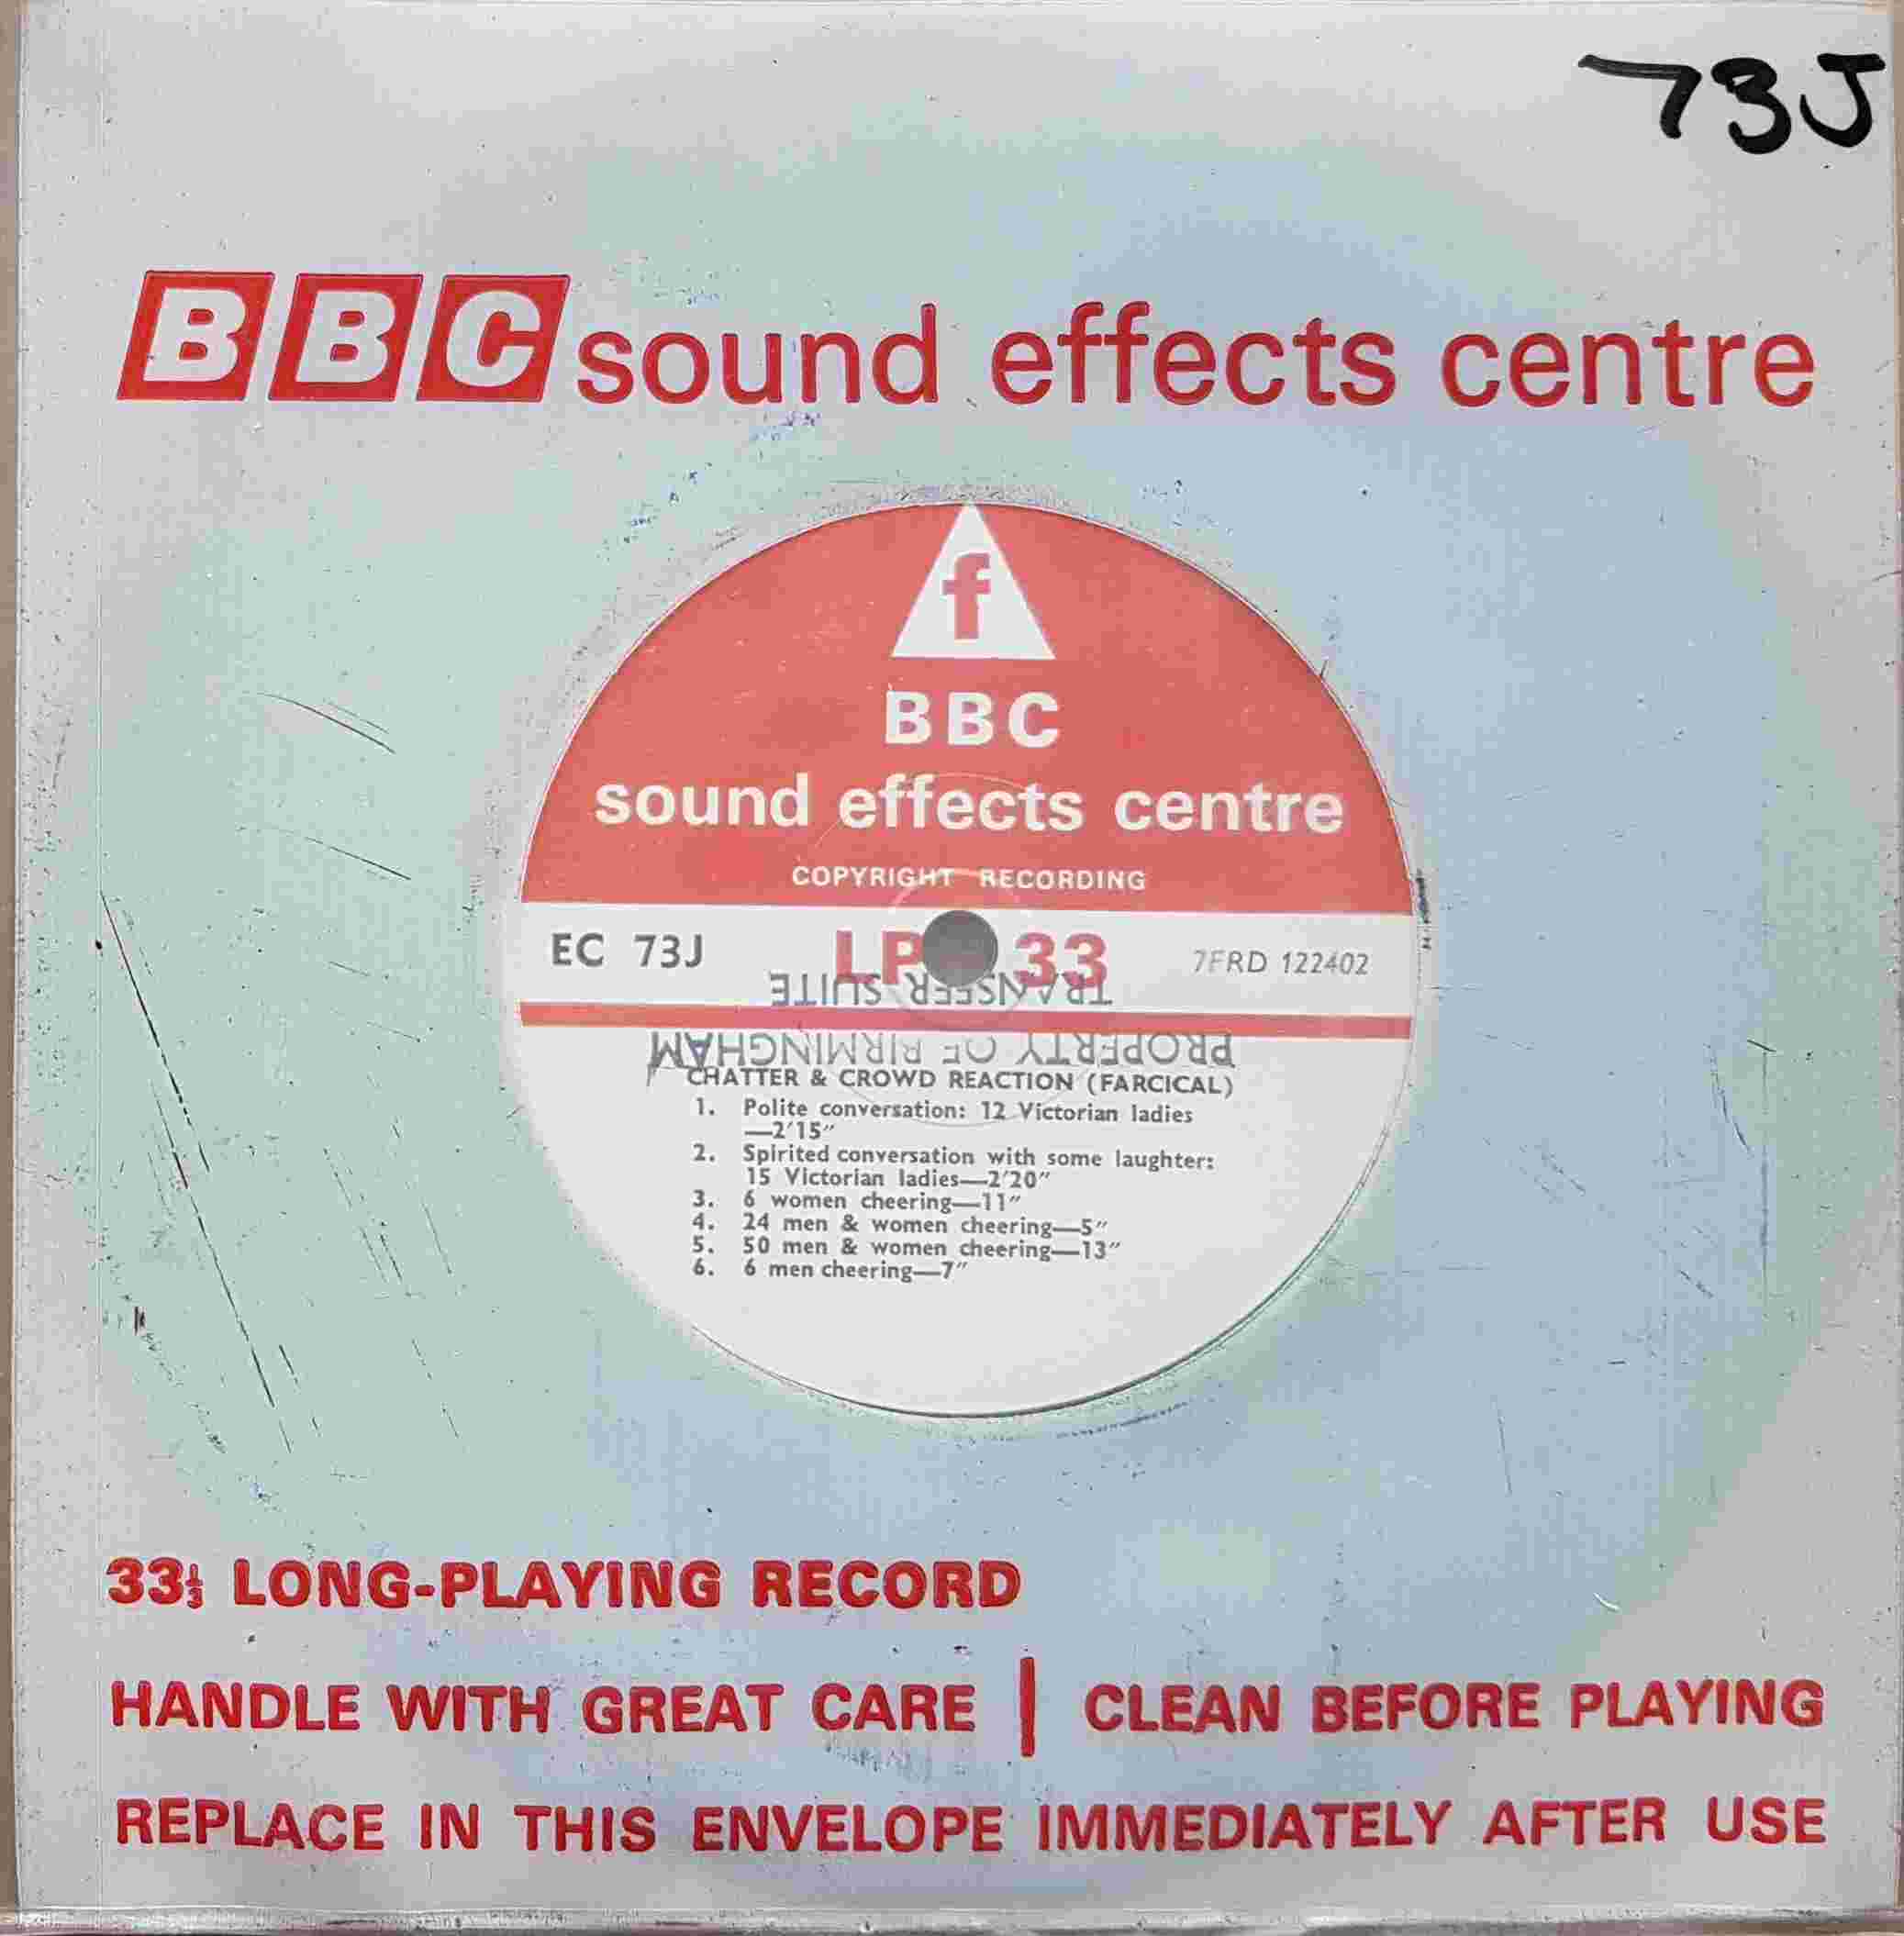 Picture of EC 73J Chatter & crowd reaction (farcical) by artist Not registered from the BBC records and Tapes library